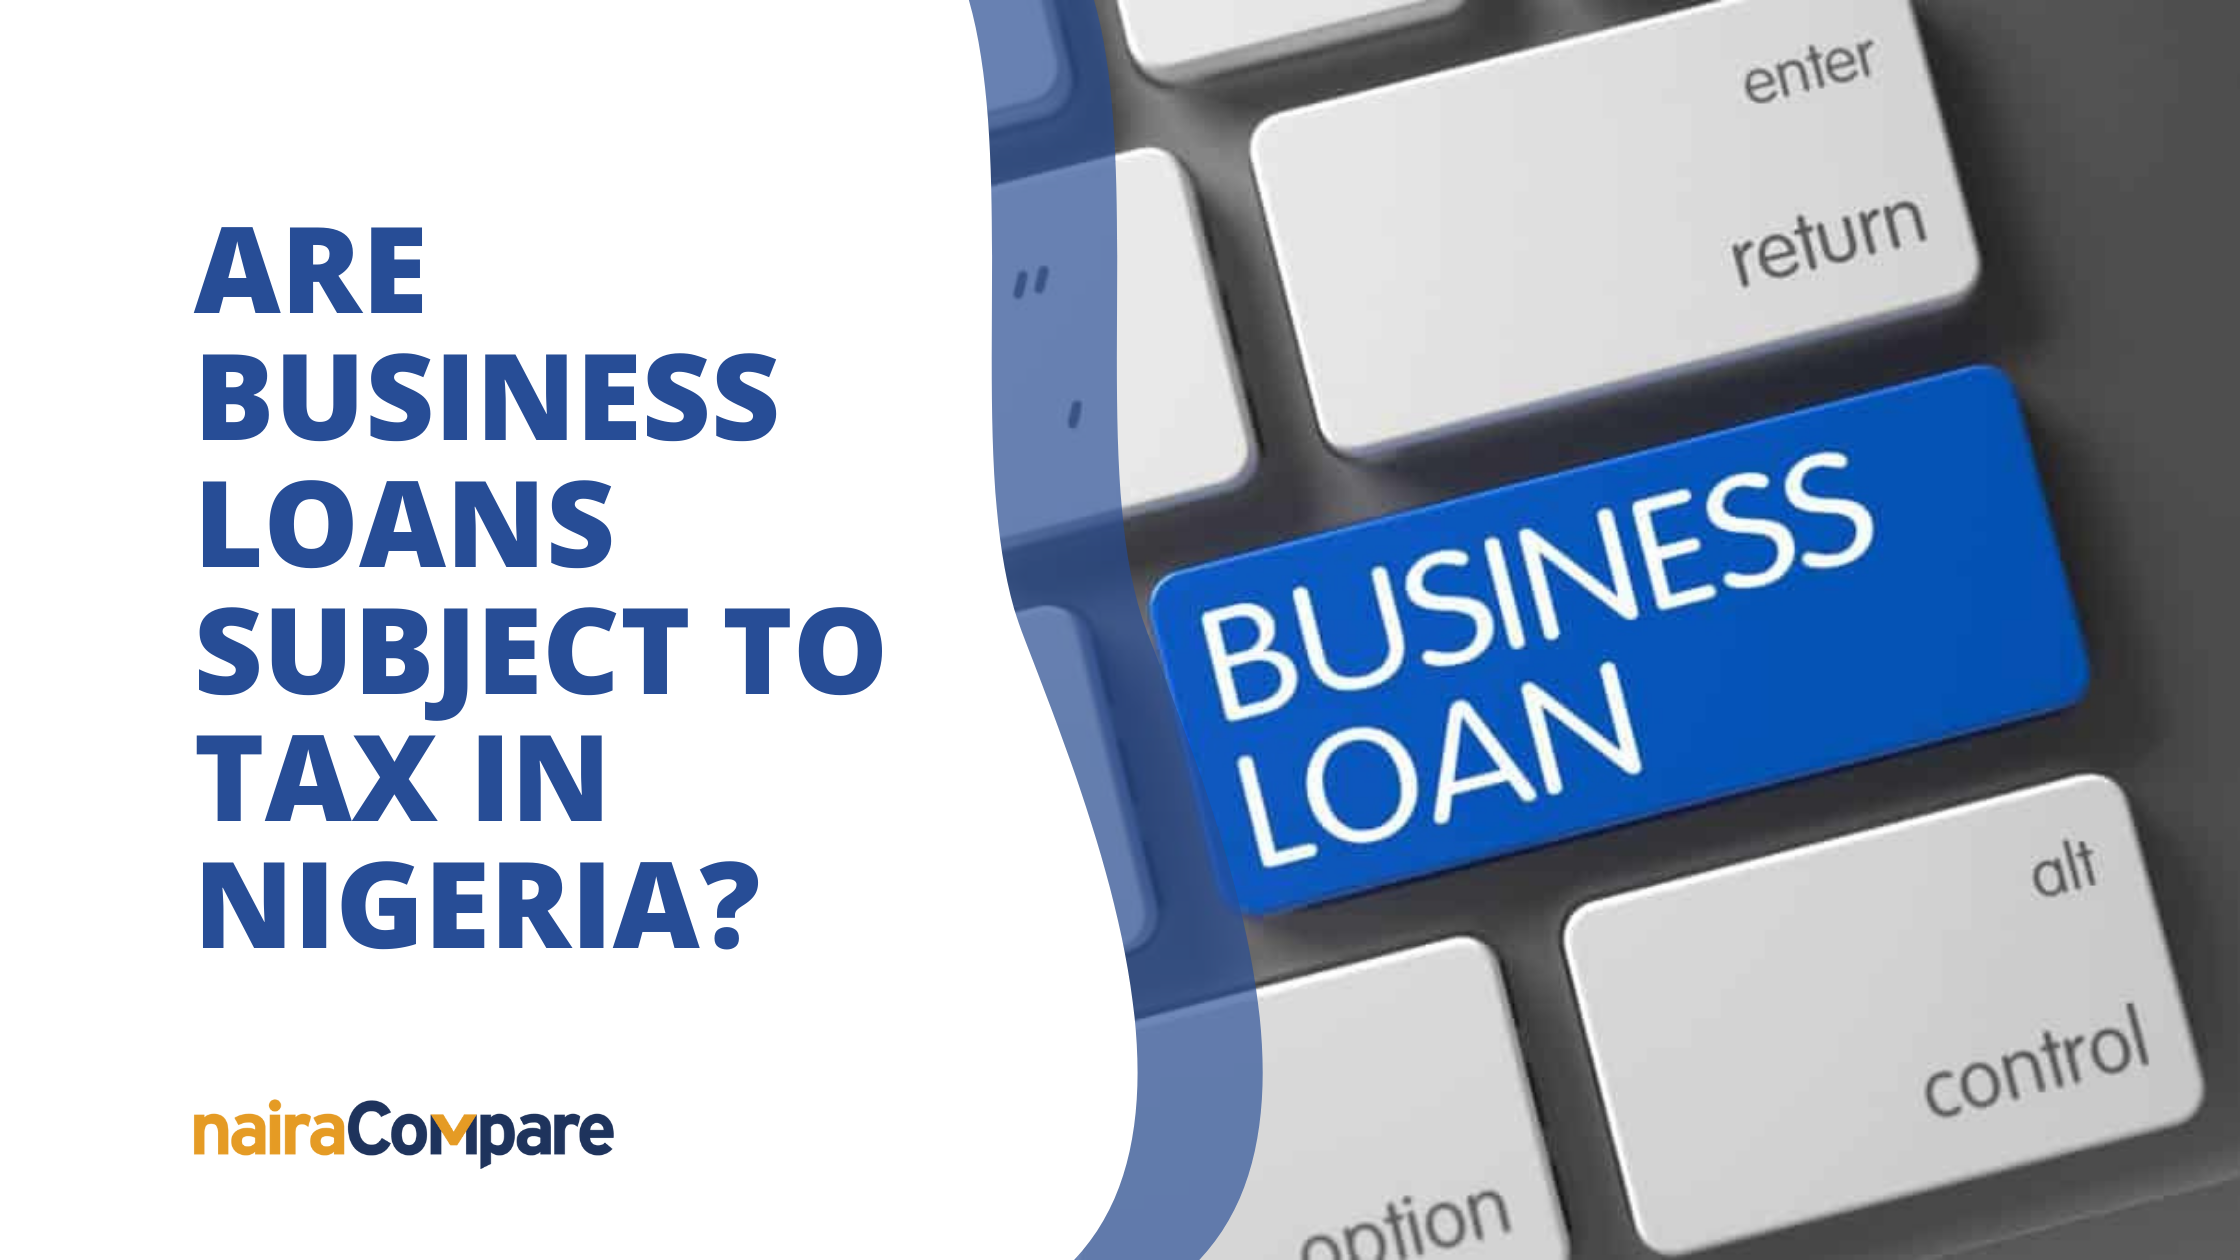 Are business loans subject to tax in Nigeria